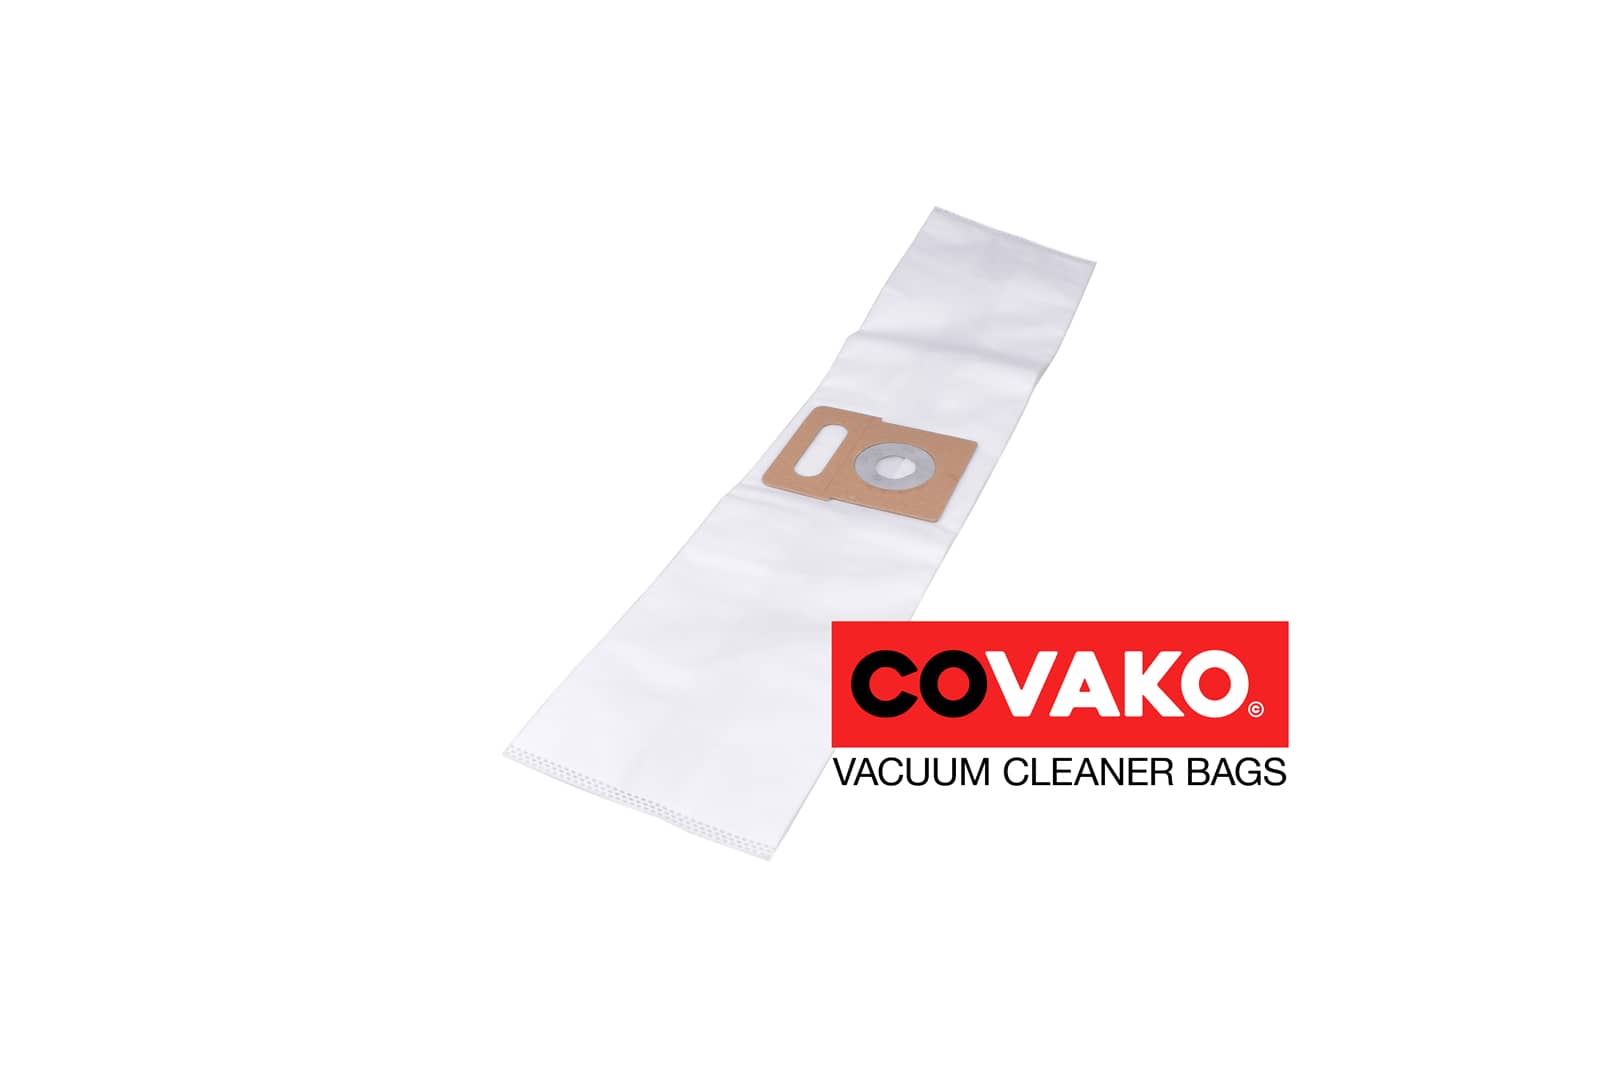 Fast 643533 / Synthesis - Fast vacuum cleaner bags